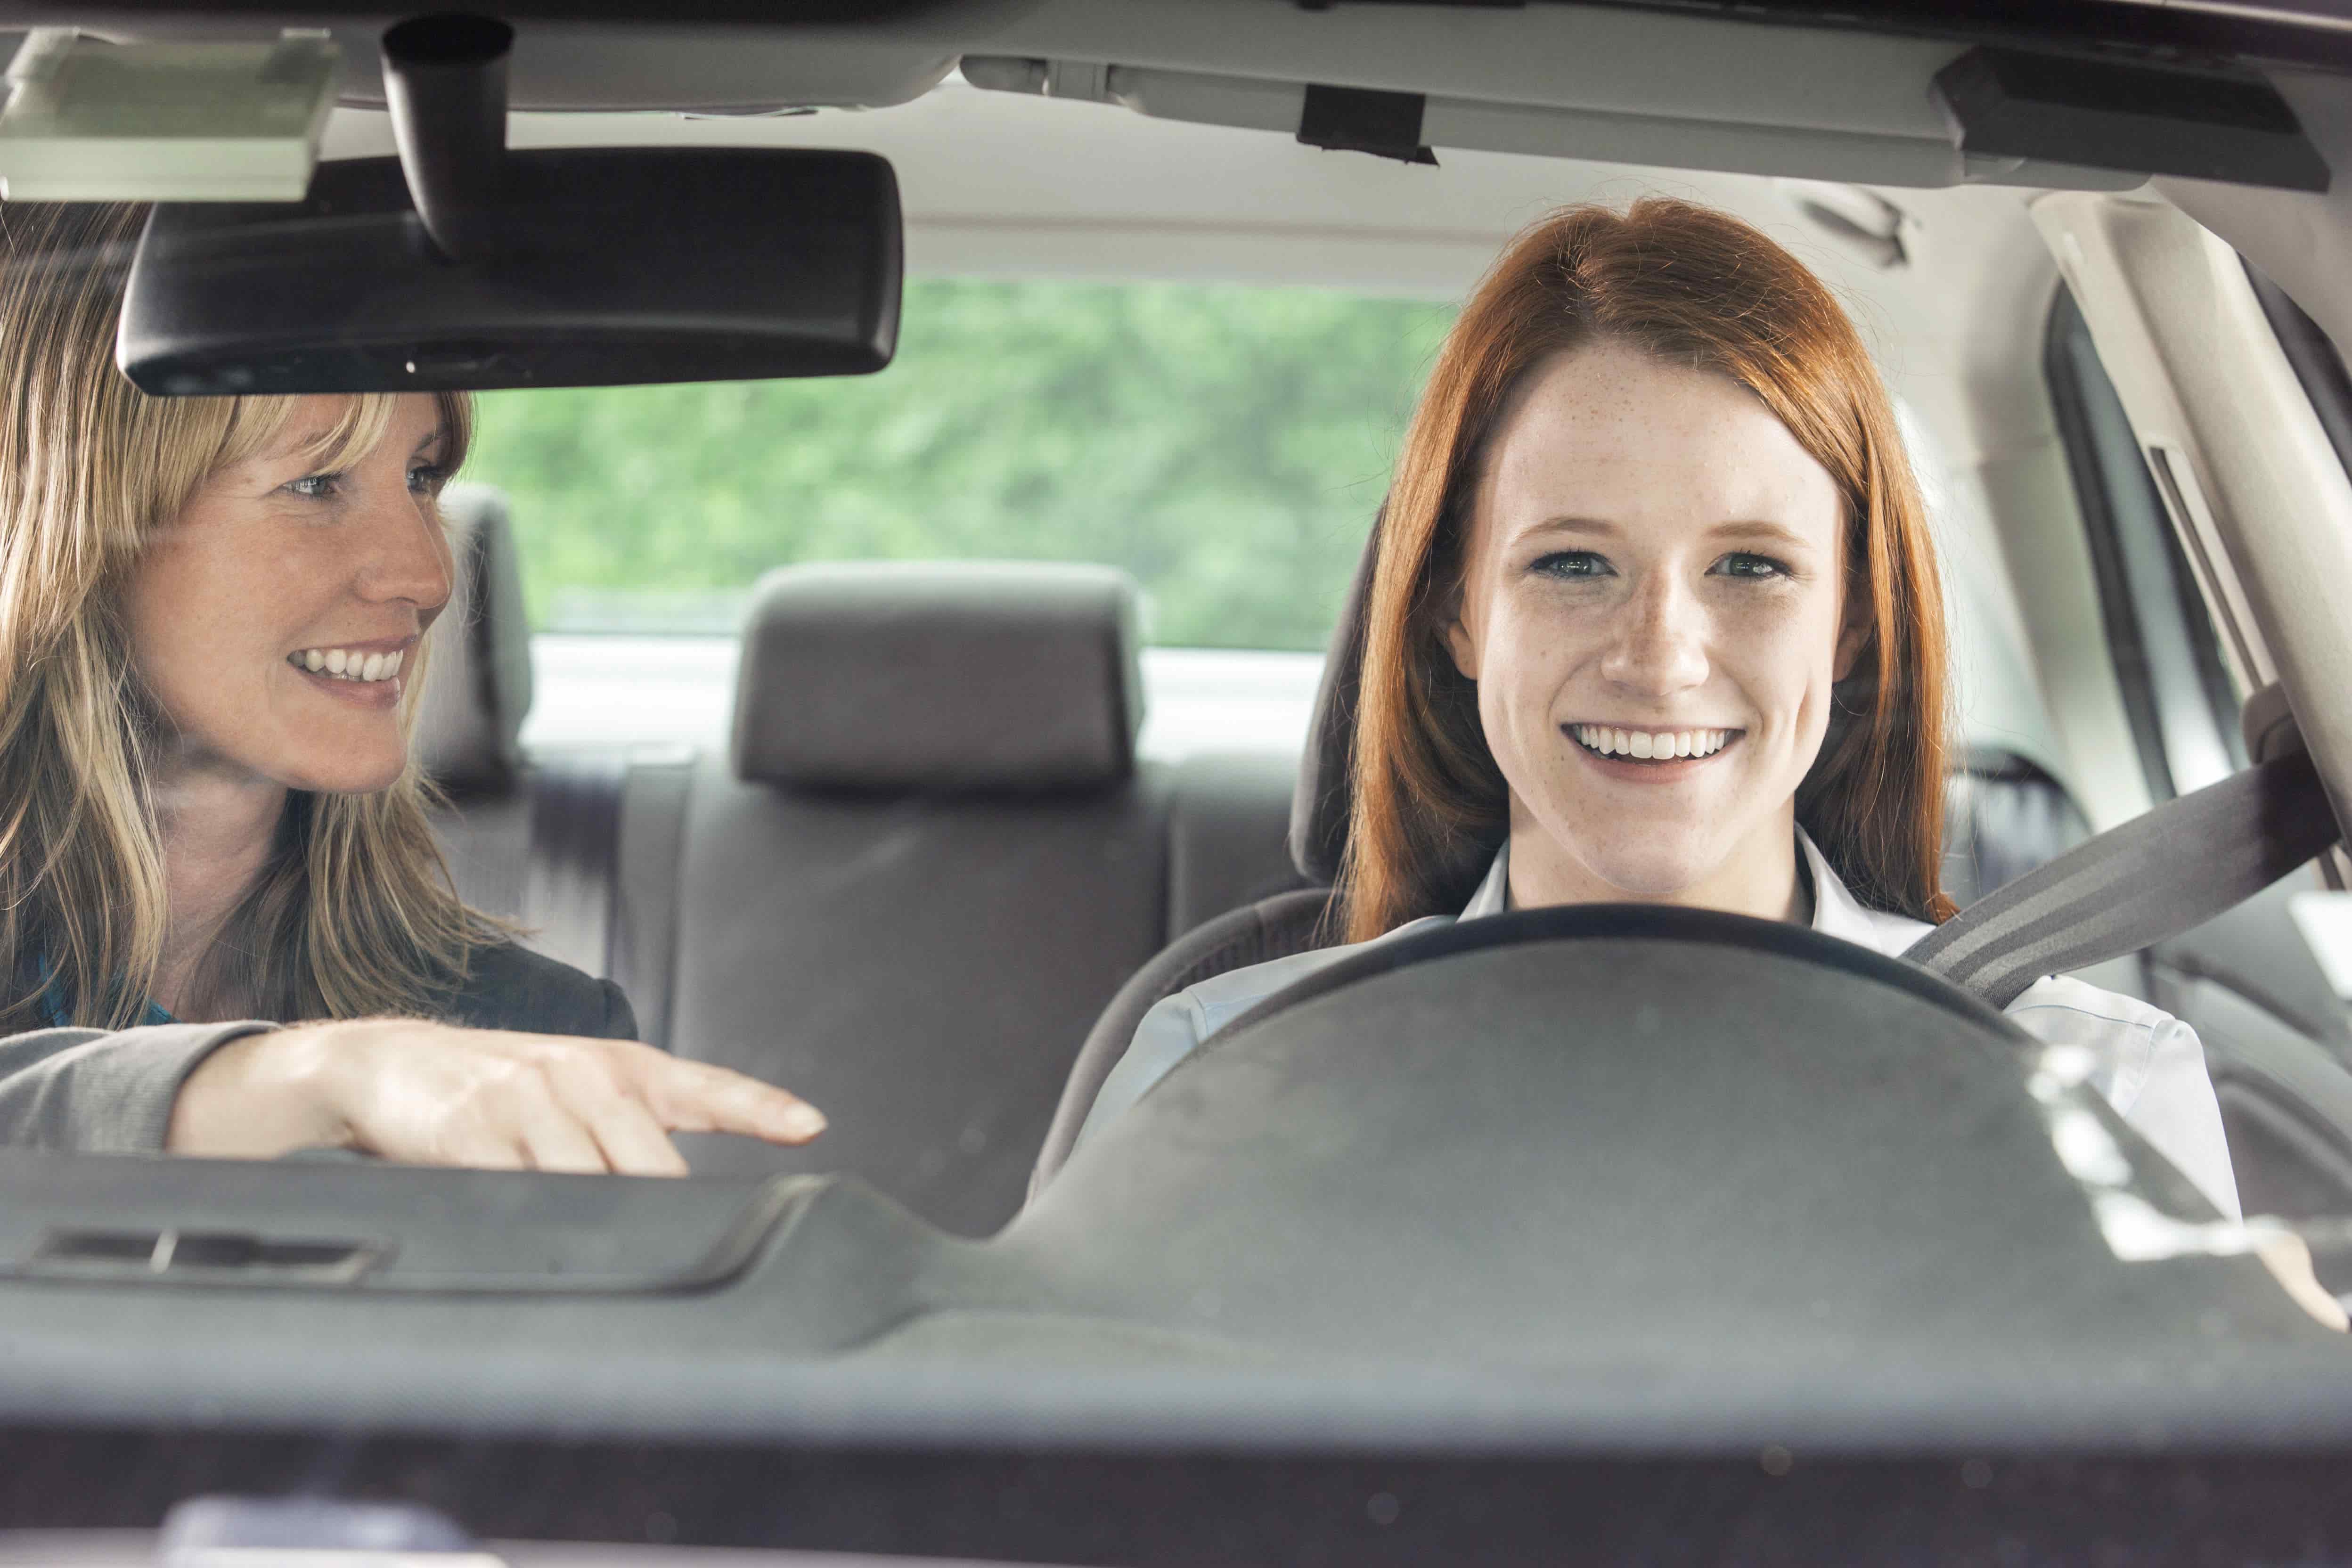 Discover 10 tips to be a good accompanist for obtaining a driving license.